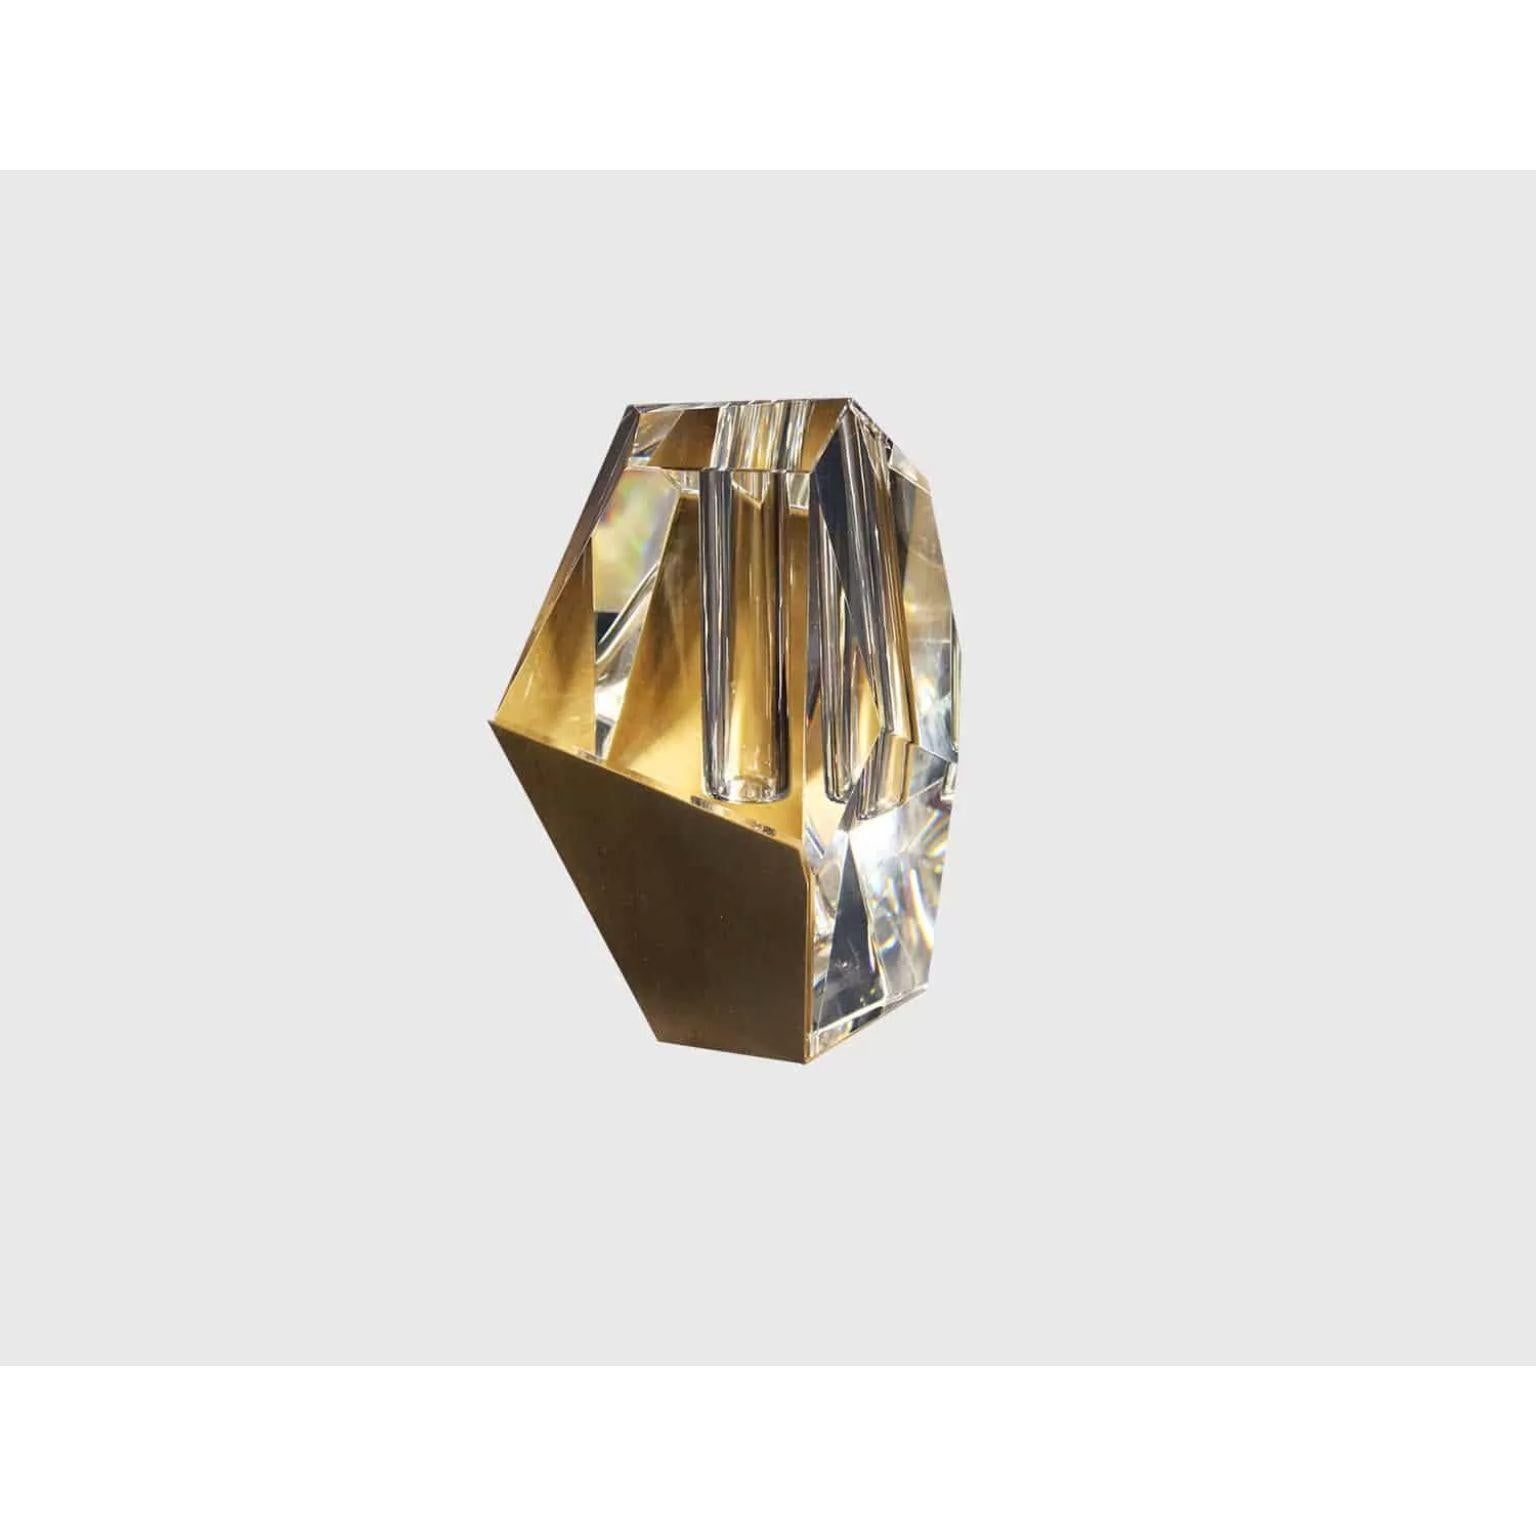 Small Asymmetrical Crystal Vase with Brass Accents by Dainte
Dimensions: D 11.5 x W 11.5 x H 18 cm.
Materials: Crystal and brass.

A modern crystal vase made of clear multifaceted crystal wrapped by a complementing brass shell lets your florals